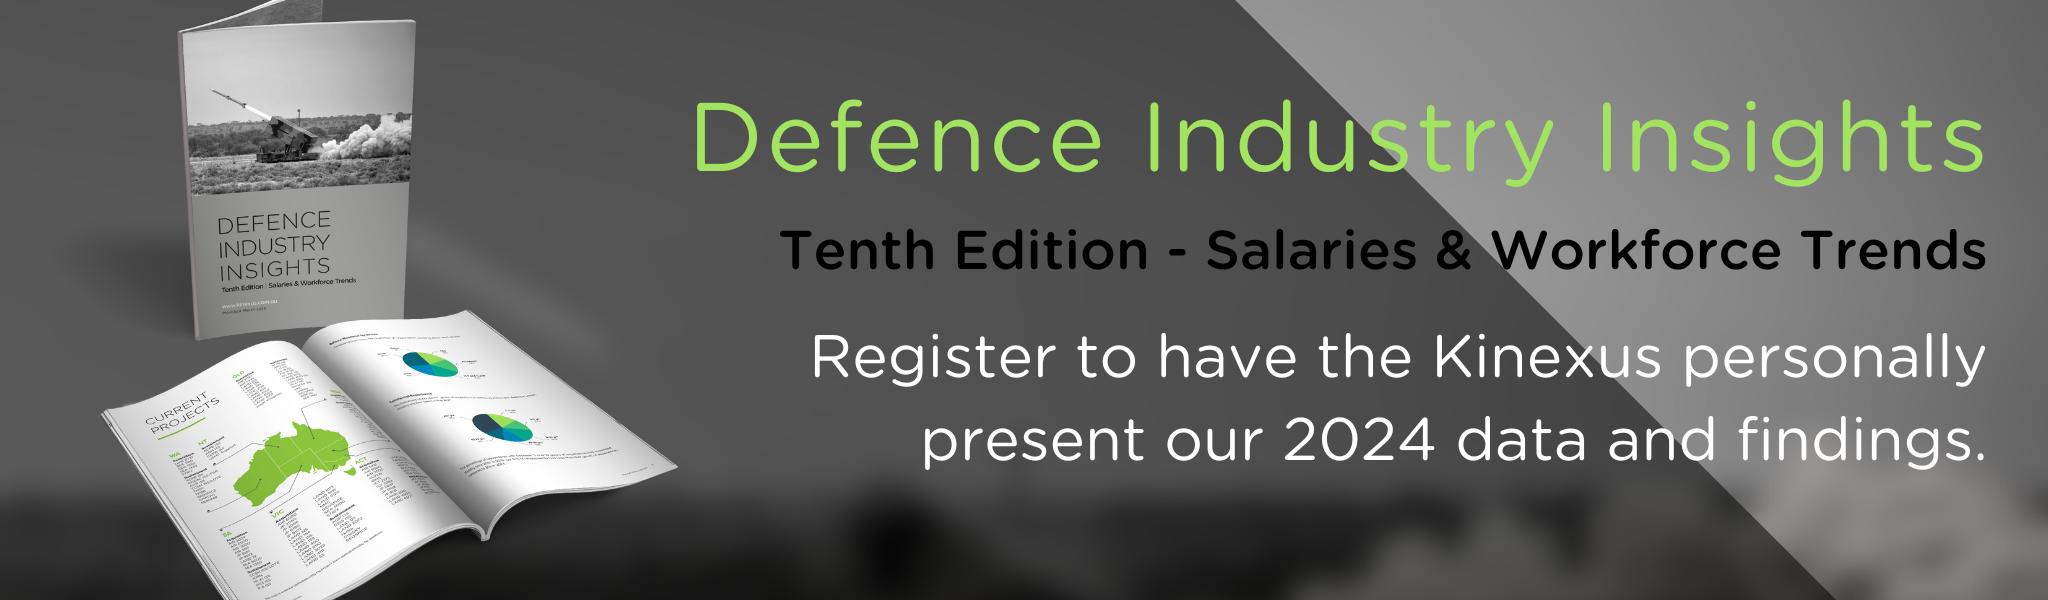 Defence Industry Insights